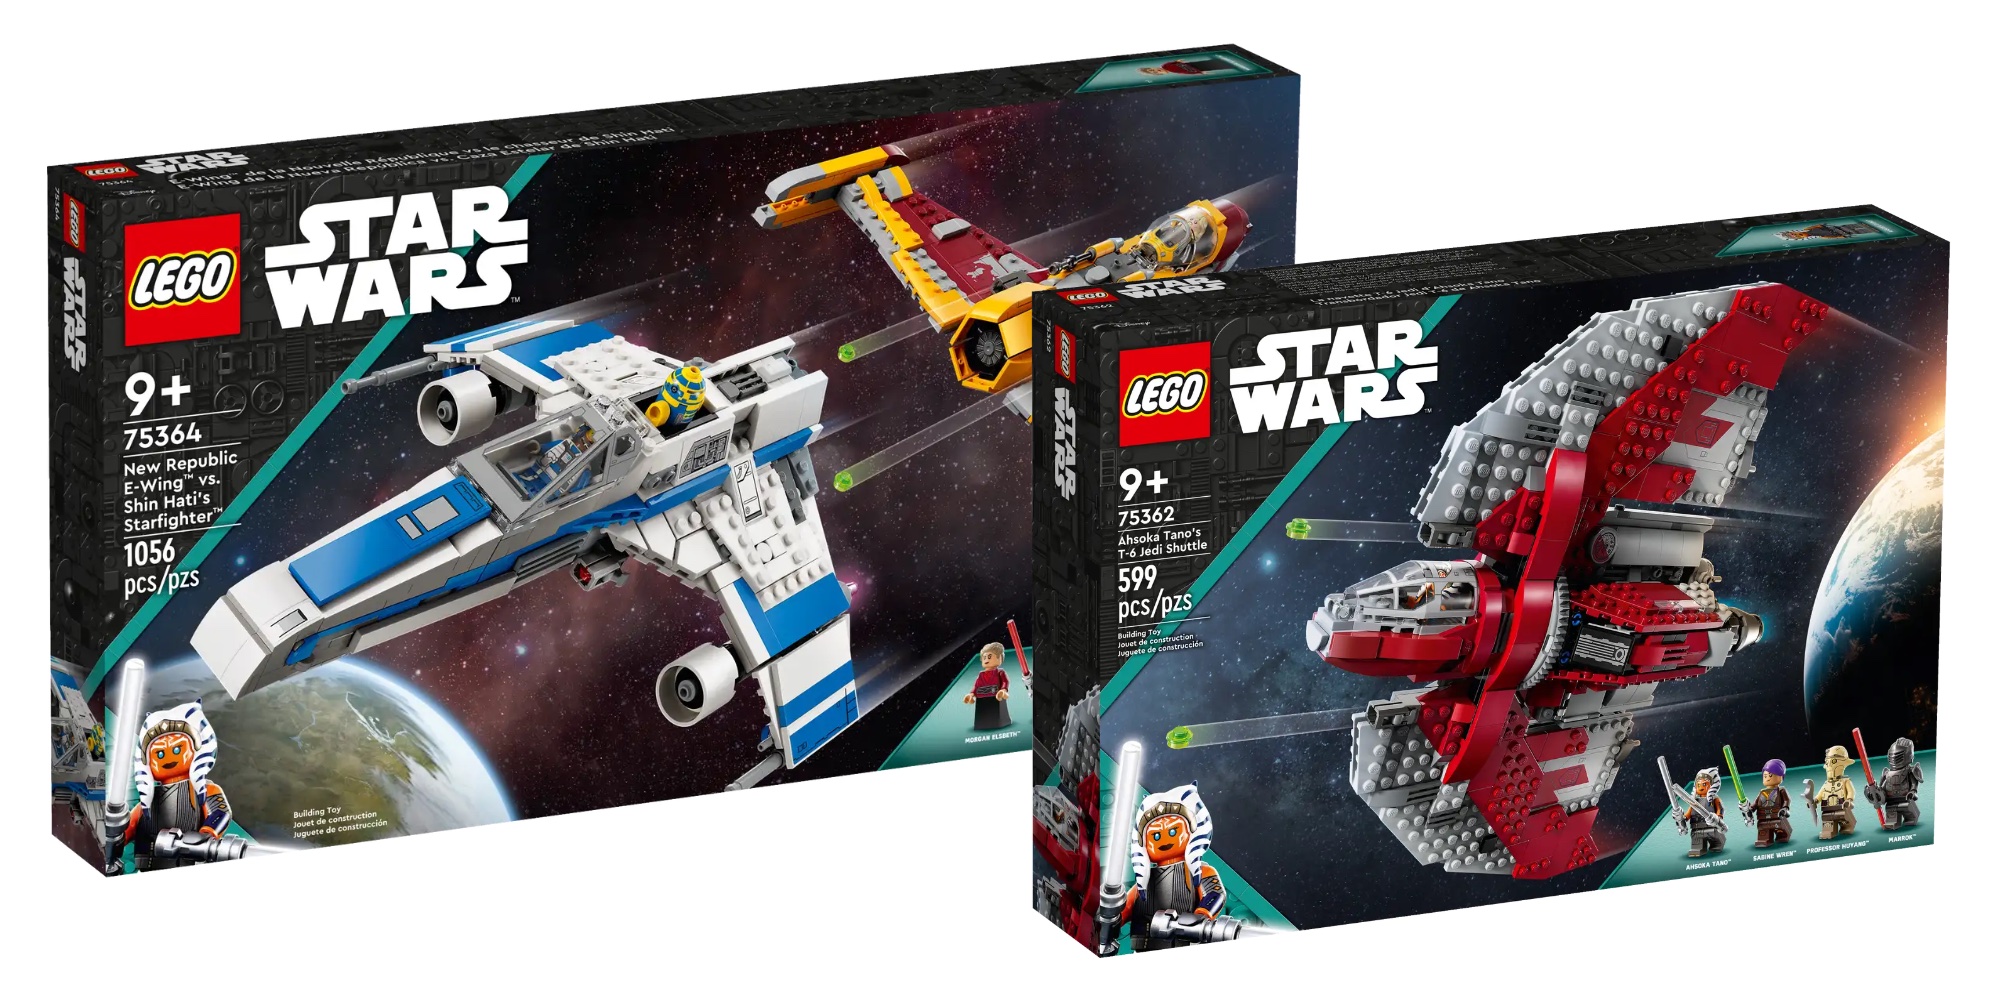 LEGO T-6 Shuttle and New Republic E-Wing launch this fall